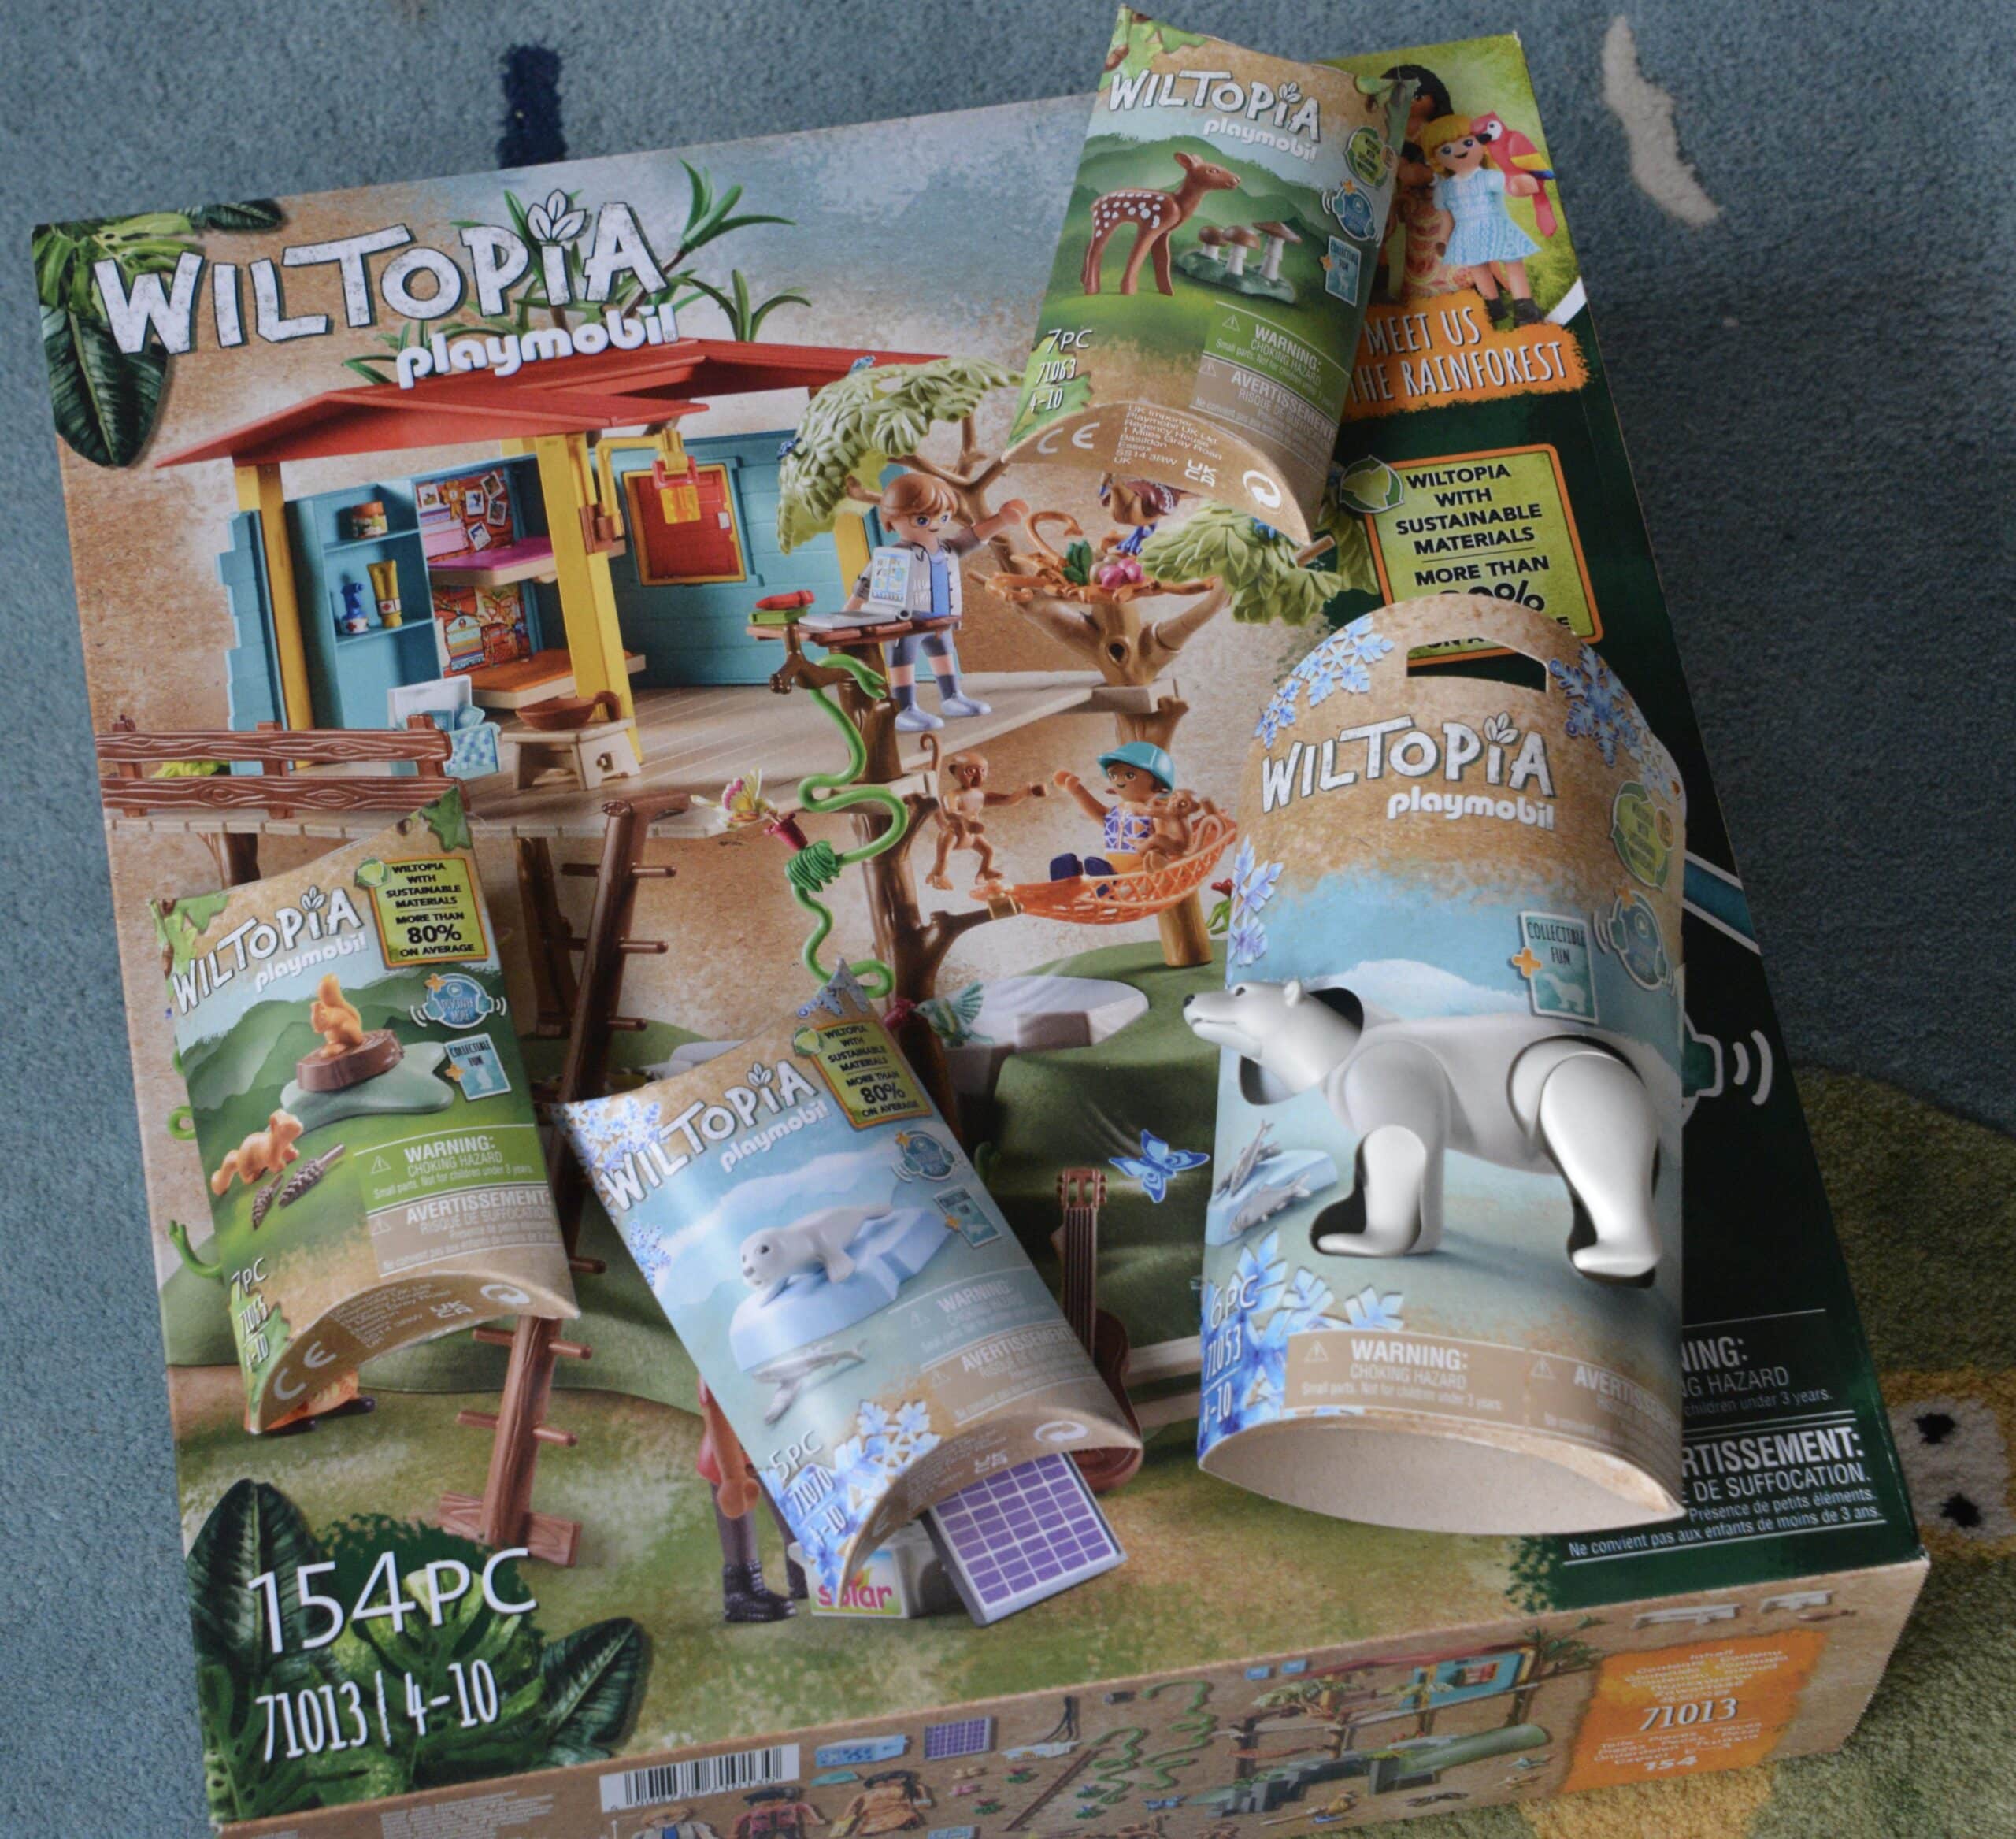 Wiltopia from Playmobil, Family tree house and small stocking filler boxes